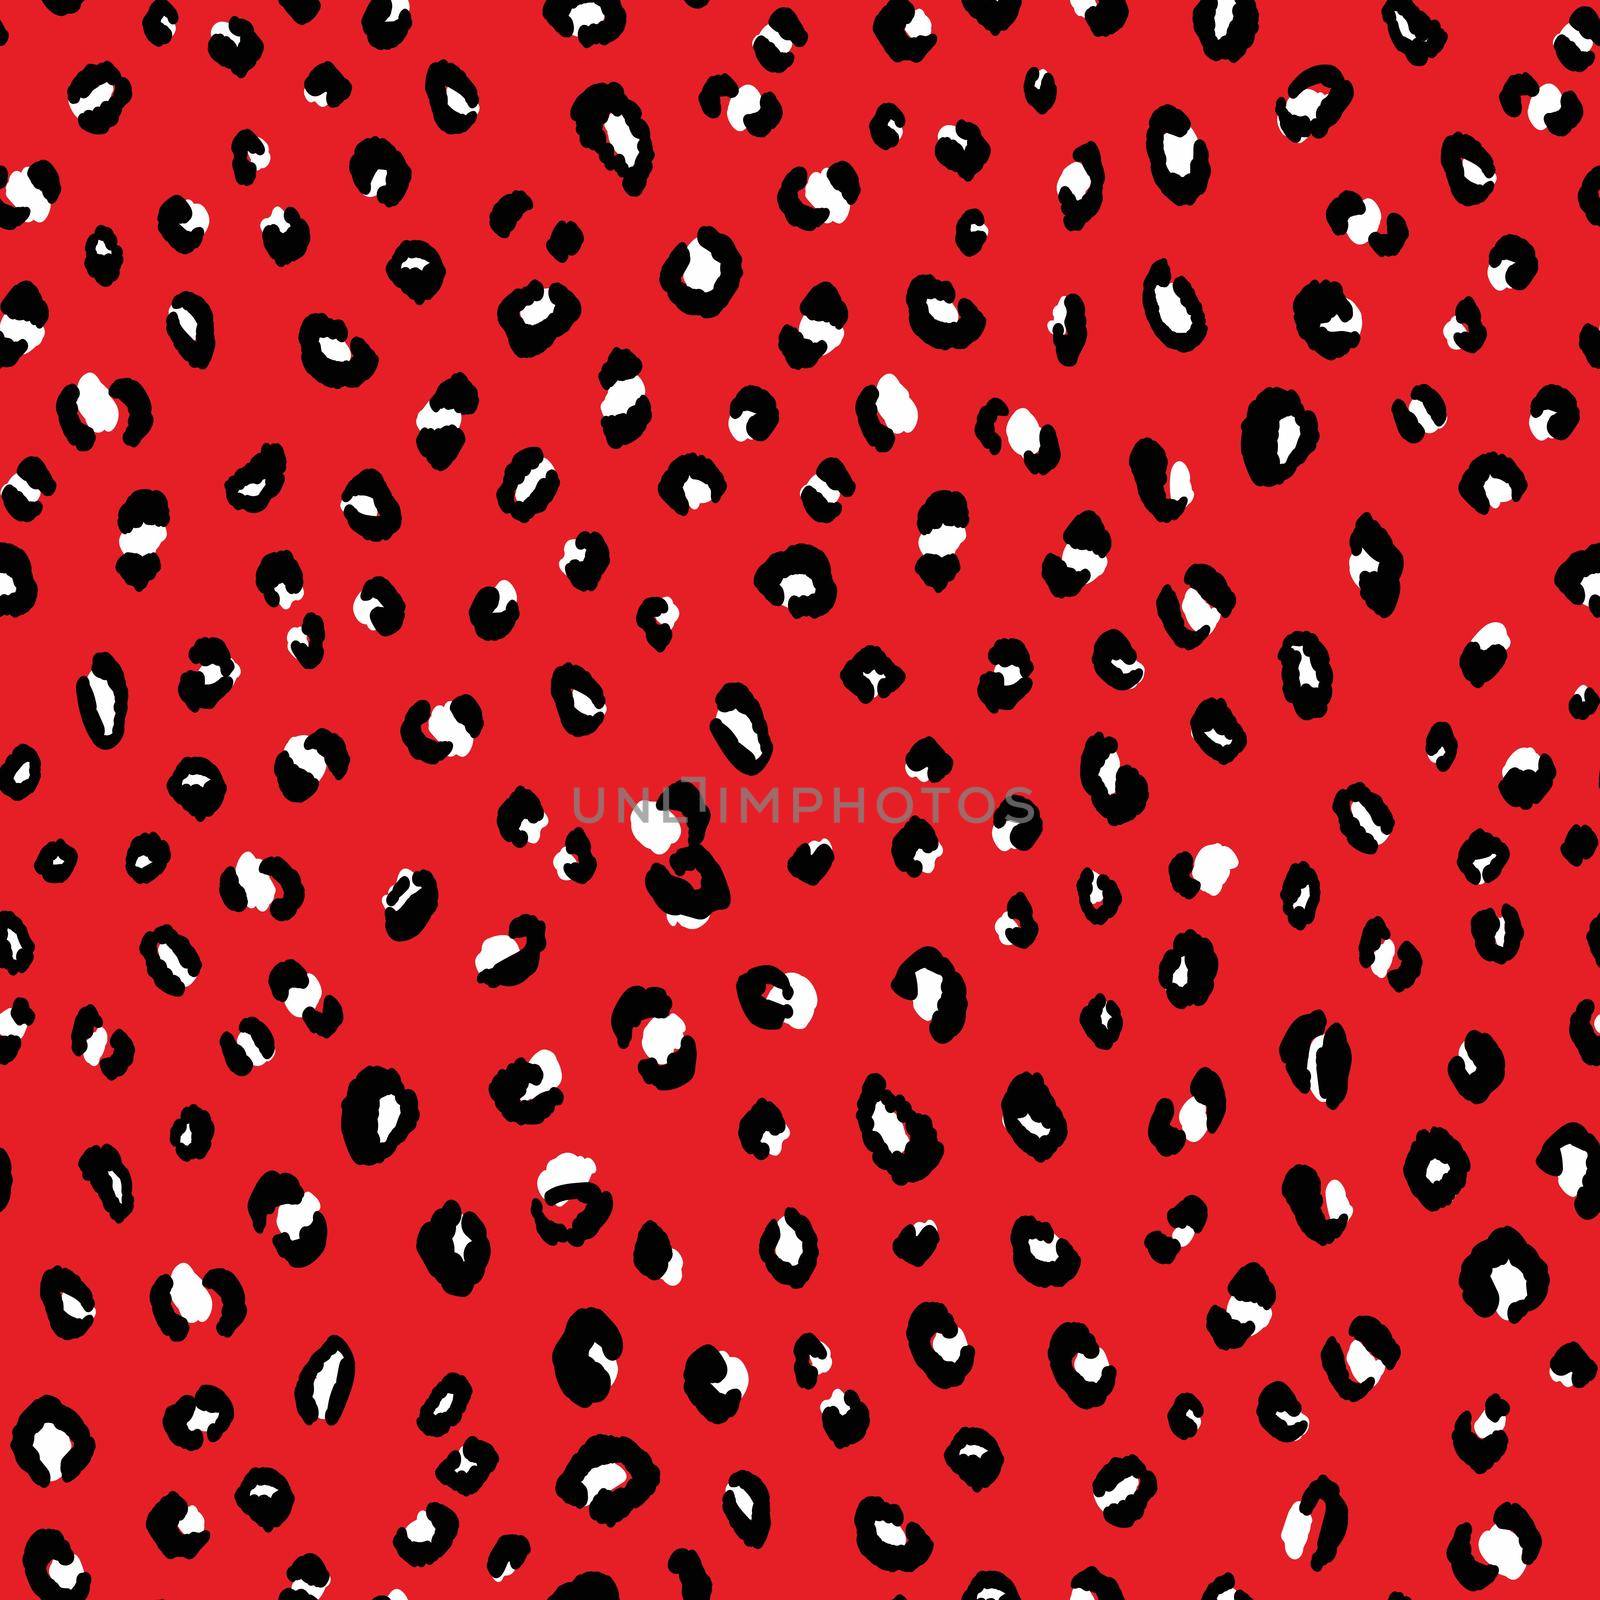 Abstract modern leopard seamless pattern. Animals trendy background. Red and black decorative vector stock illustration for print, card, postcard, fabric, textile. Modern ornament of stylized skin by allaku